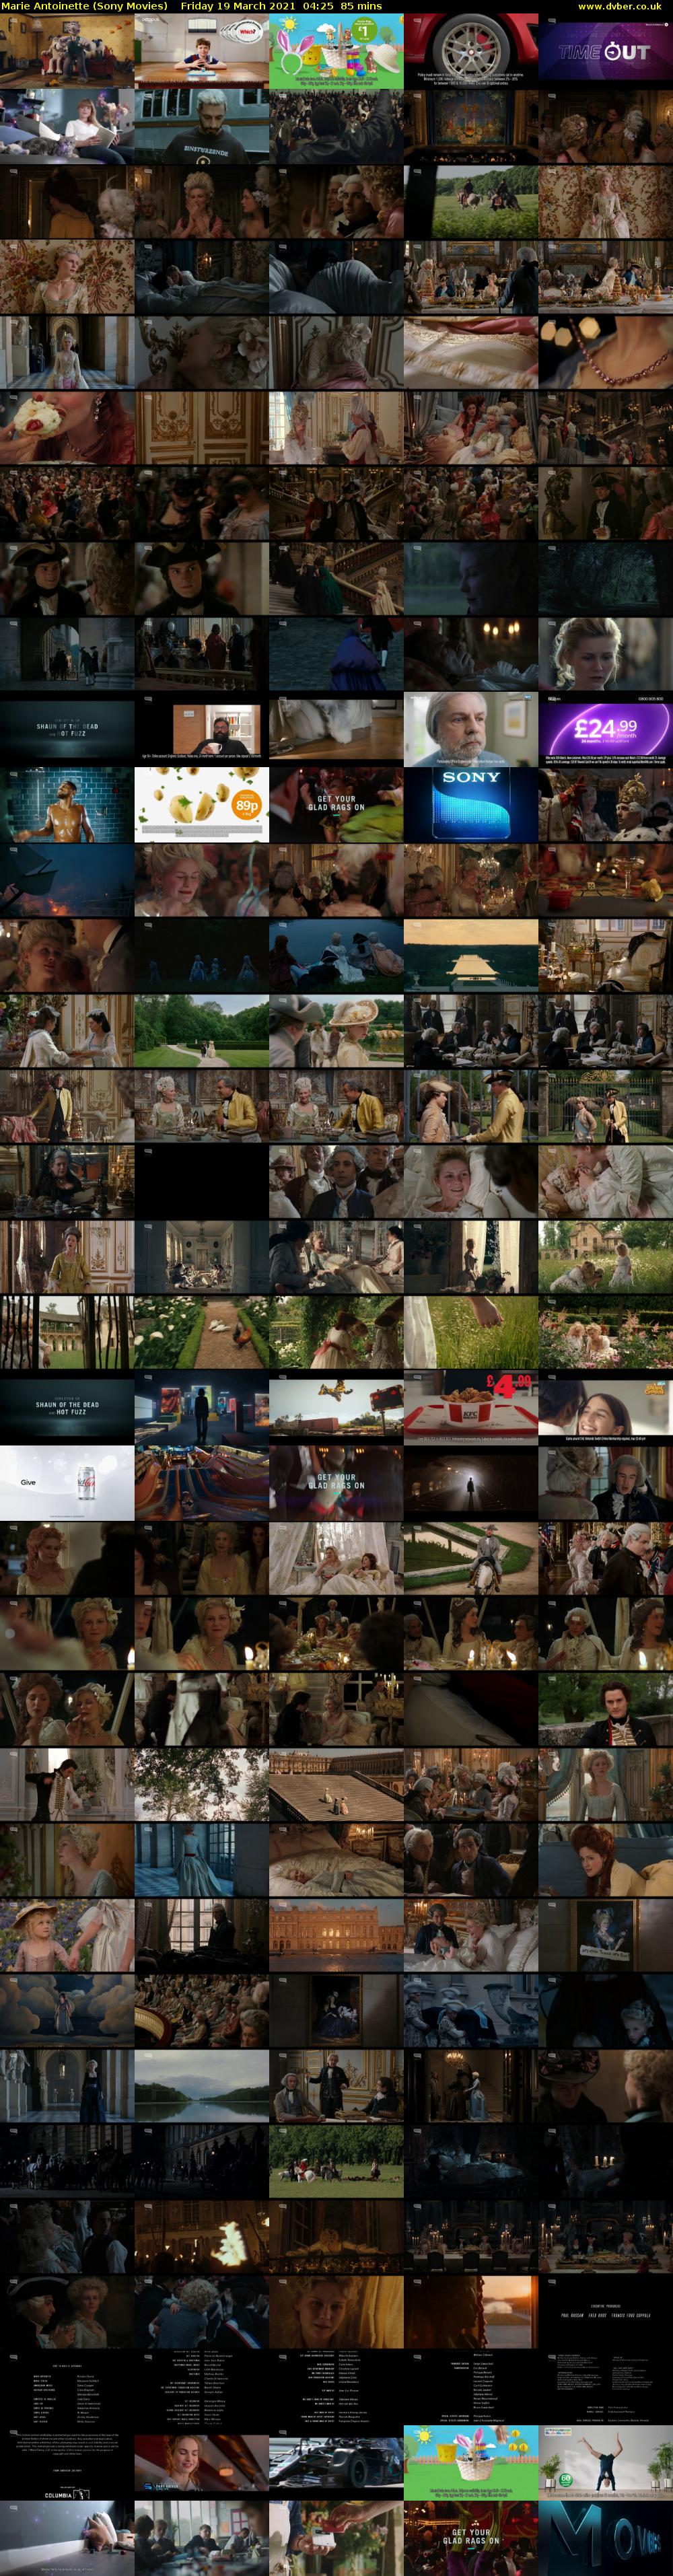 Marie Antoinette (Sony Movies) Friday 19 March 2021 04:25 - 05:50